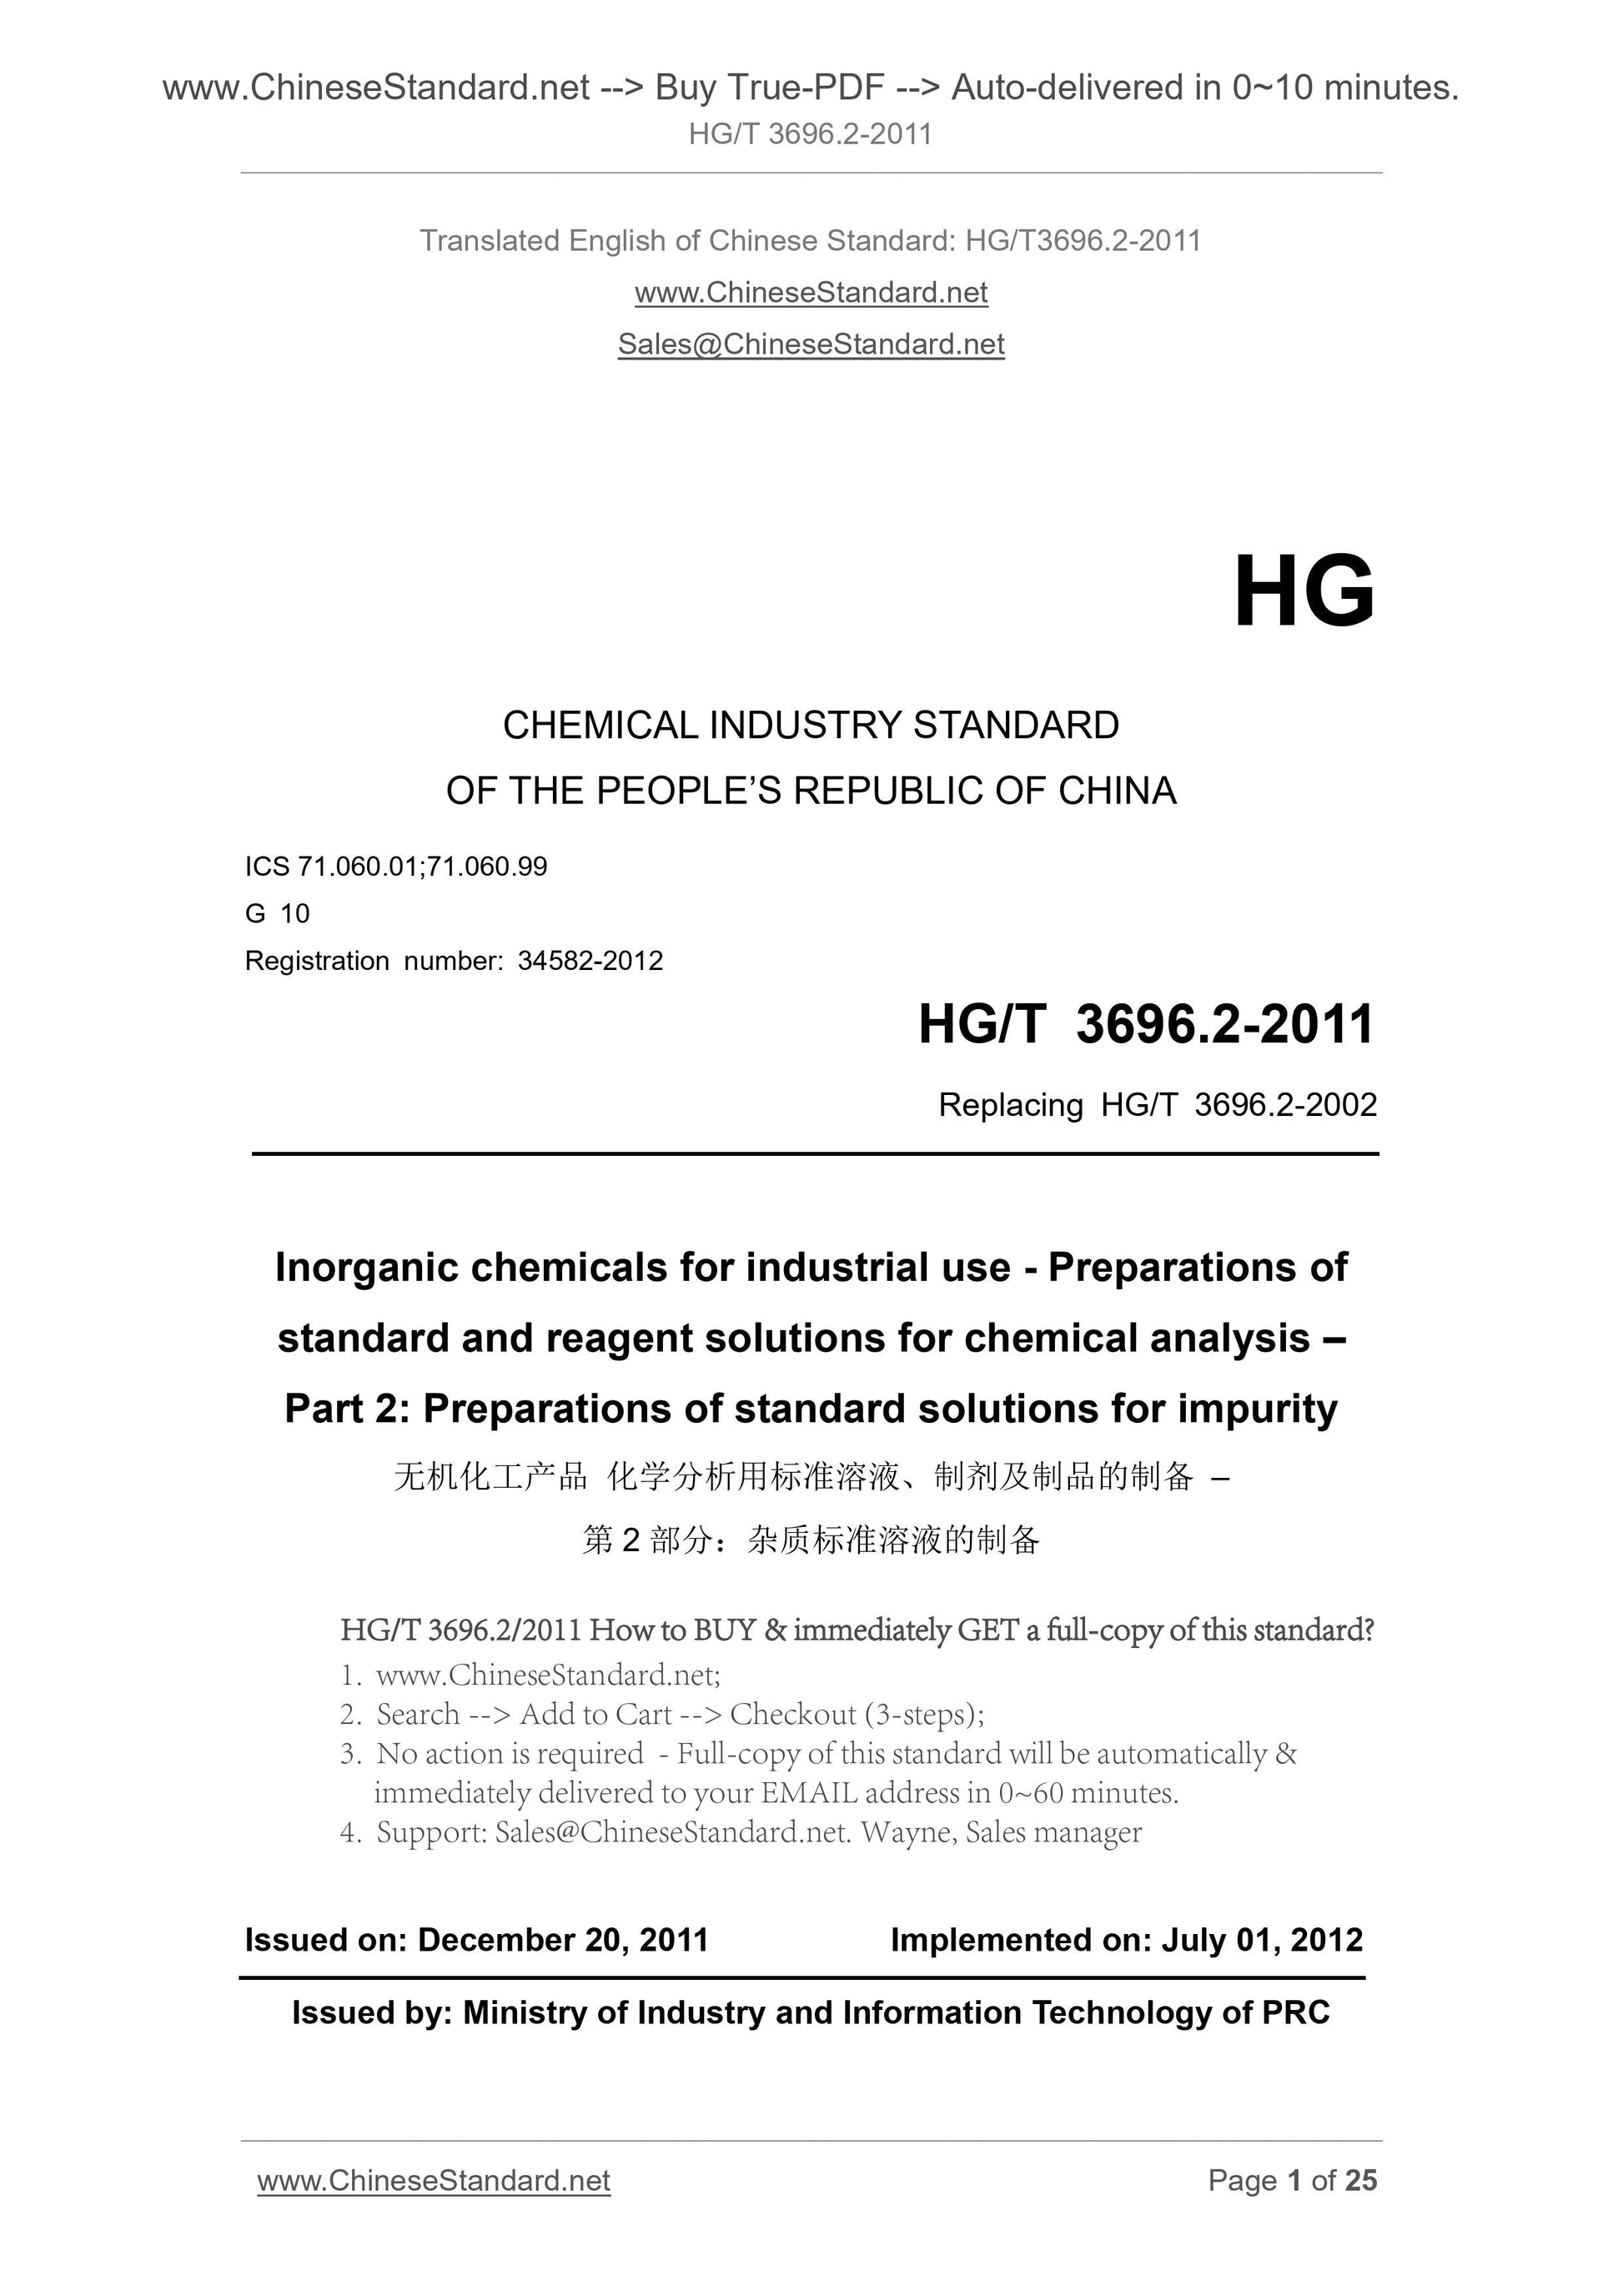 HG/T 3696.2-2011 Page 1